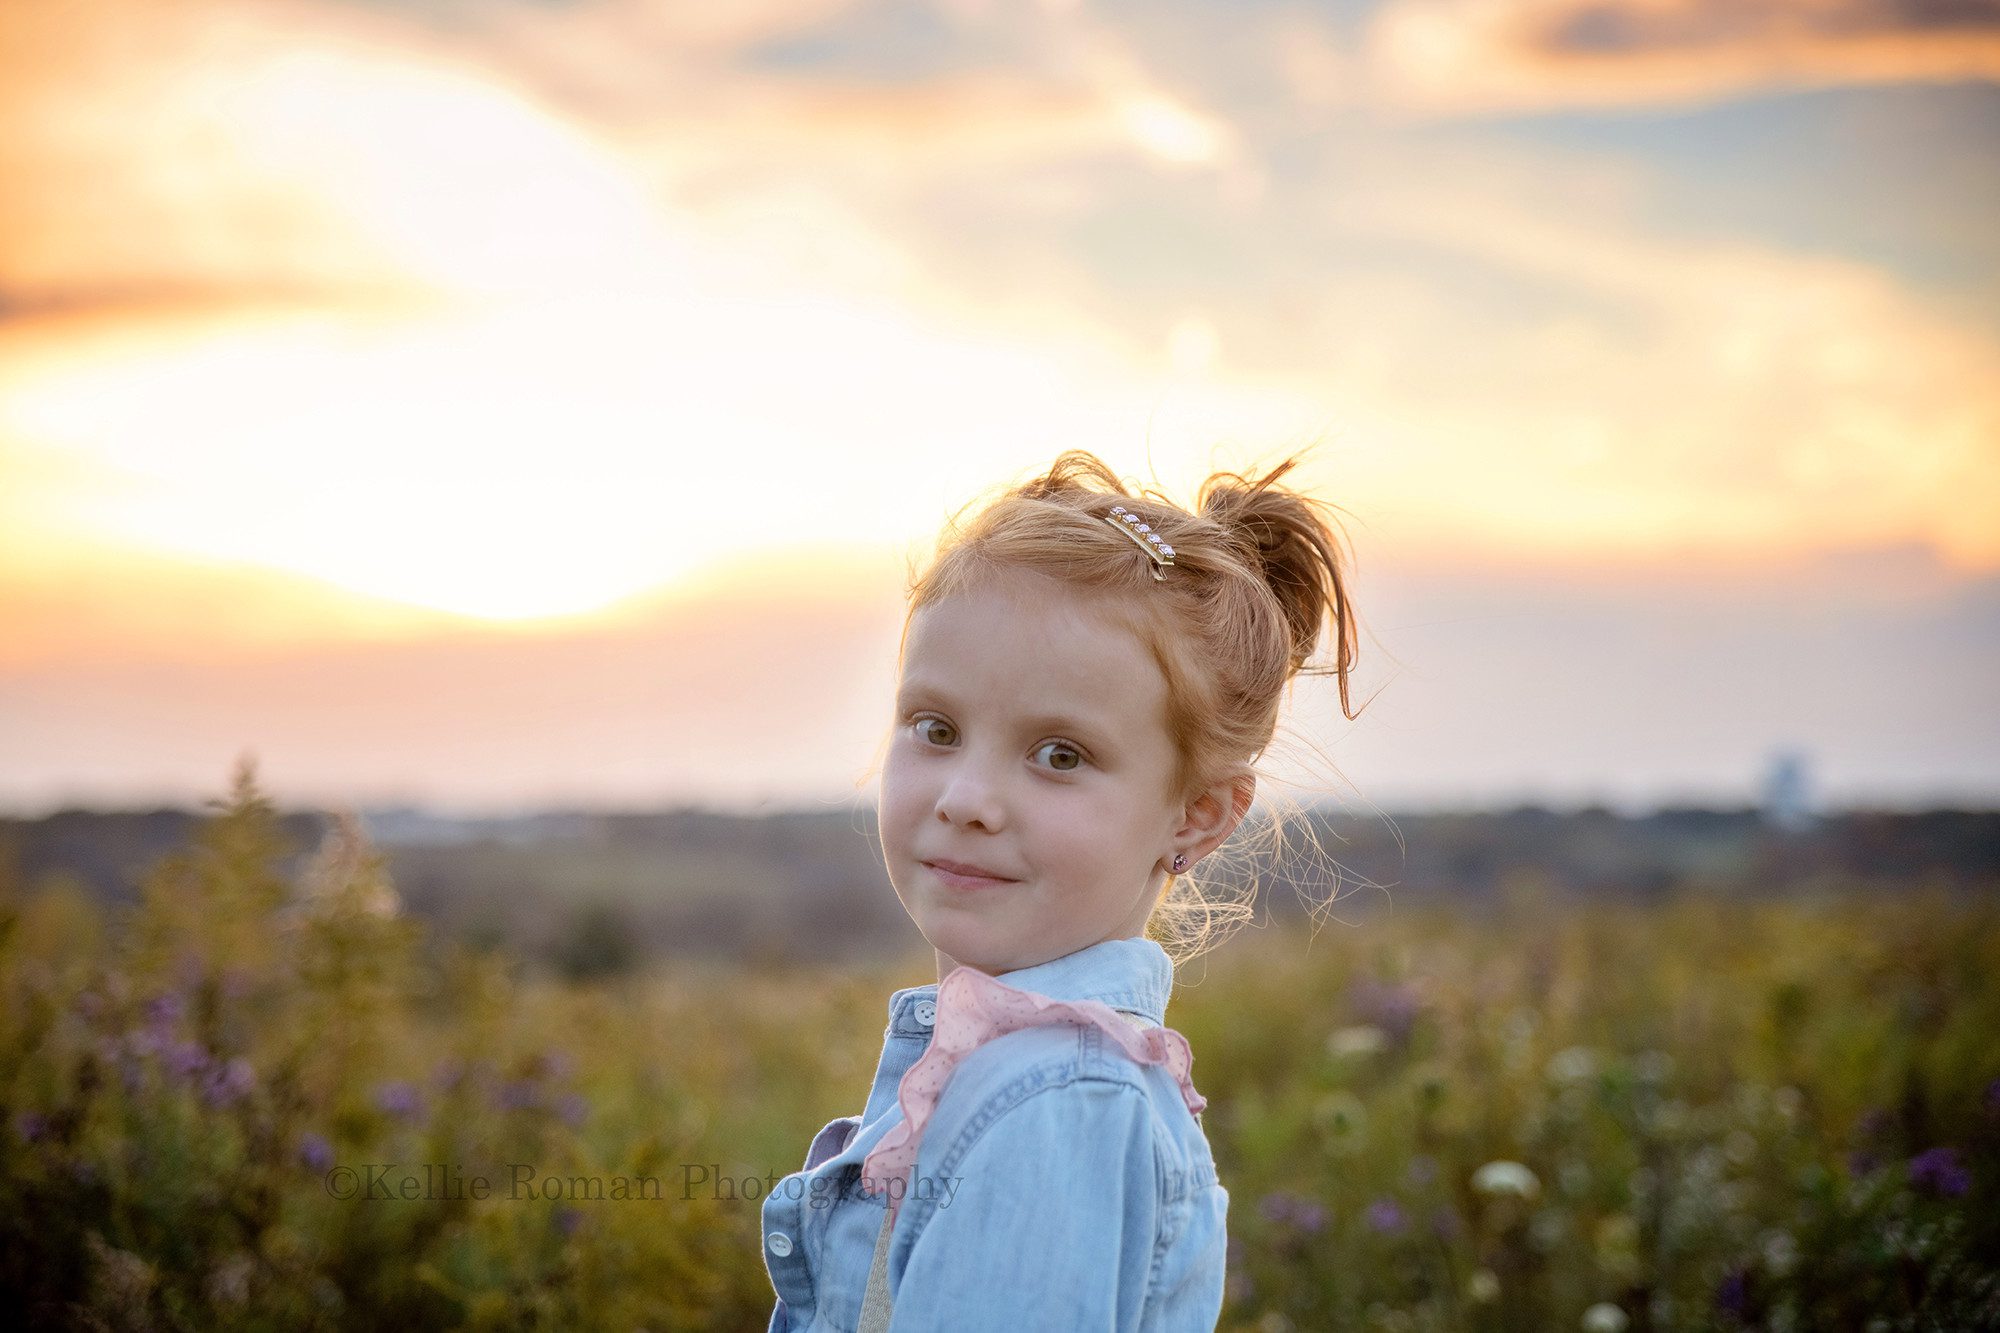 sunset milestone a young girl in milwaukee standing in a field of tall grass the with sun setting on the horizon behind her the sky is beautiful shades of blue pink and orange the girl has red hair and it's up in a messy bun she is wearing a denim shirt and pink and gold suspenders